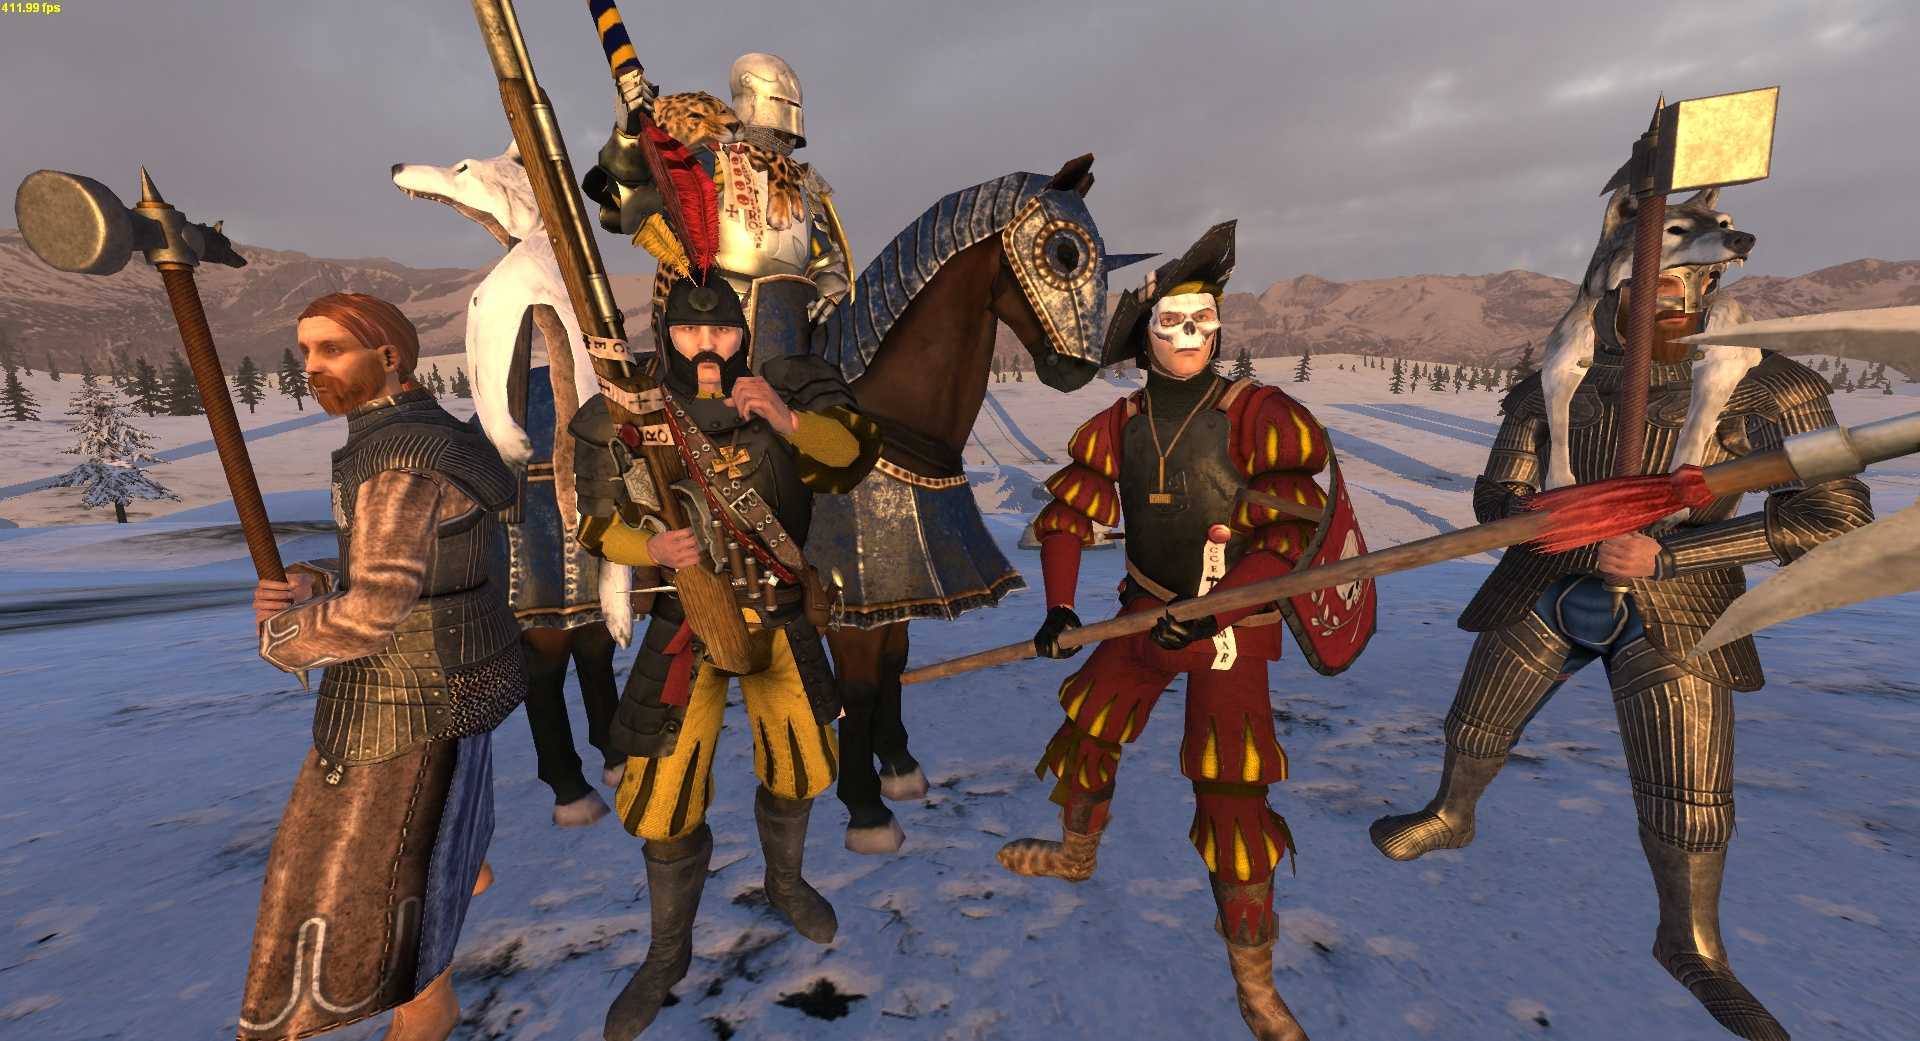 Warband warsword. Warband Warsword Conquest. Mount and Blade Warsword Conquest. Mount and Blade Warband Warsword Conquest. Warsword Conquest-1.2.